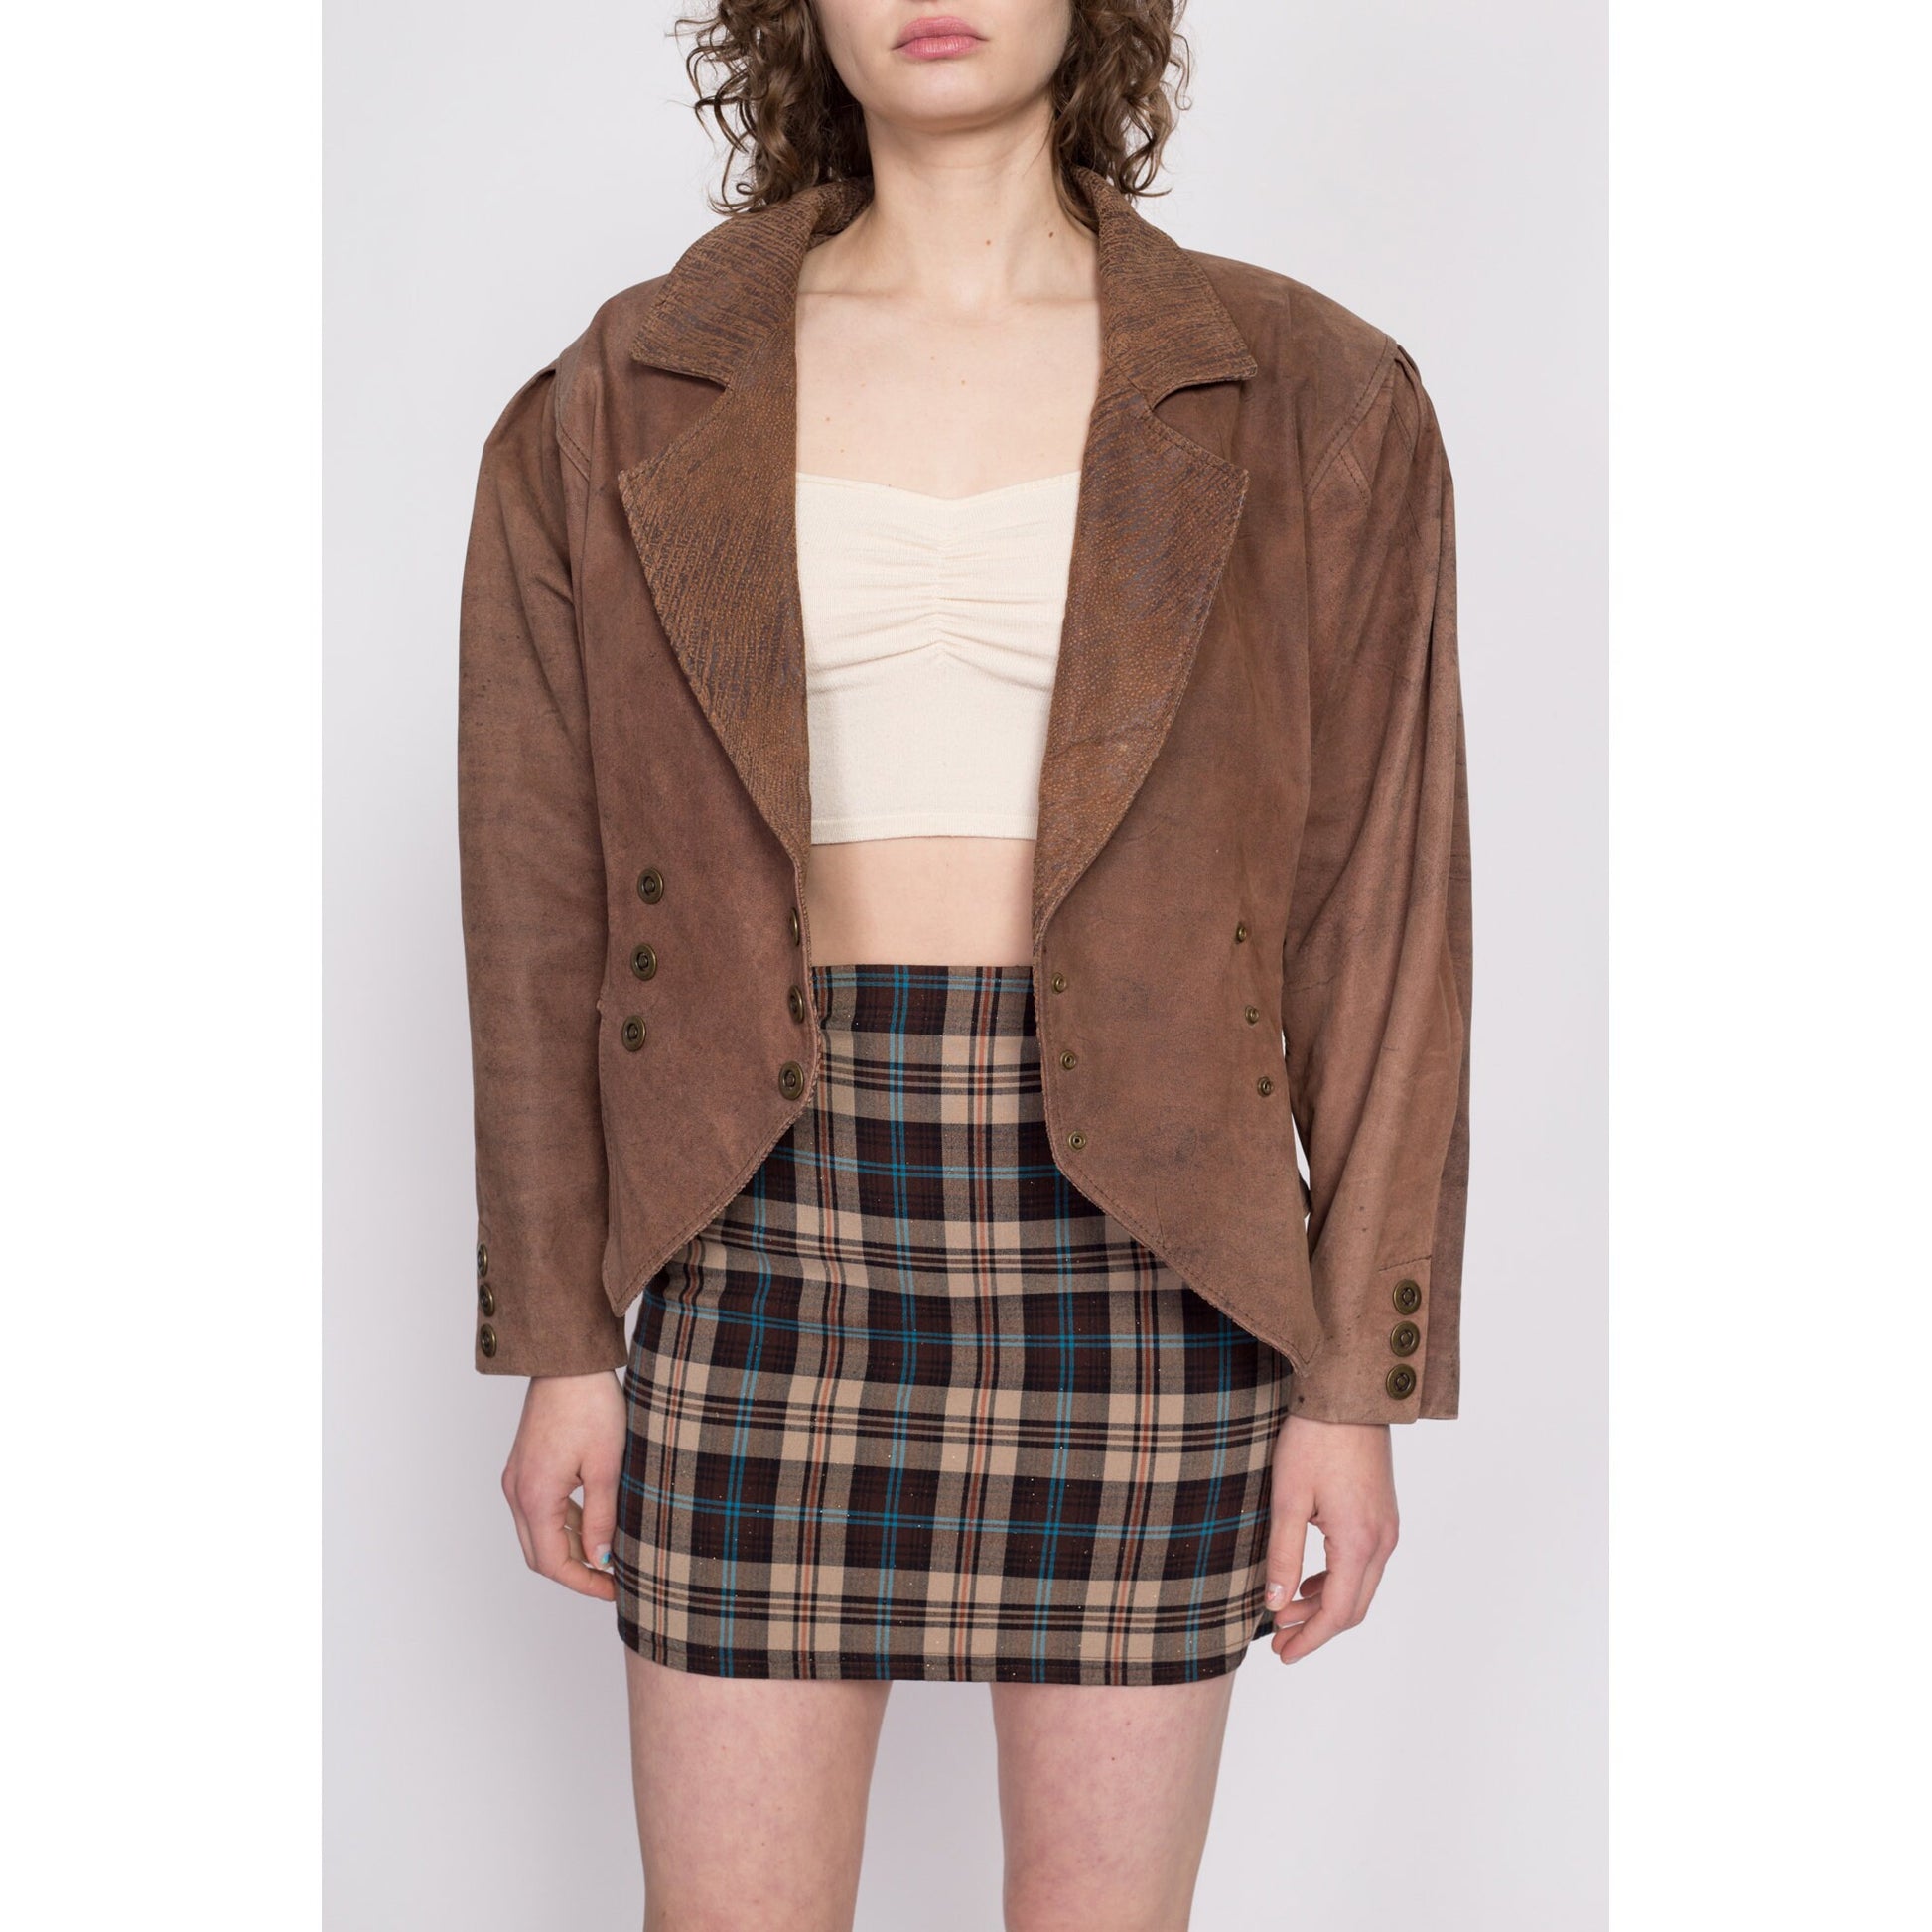 80s G-III Suede Cinched Waist Cropped Jacket - Medium | Vintage Oversized Brown Leather Double Breasted Bomber Coat